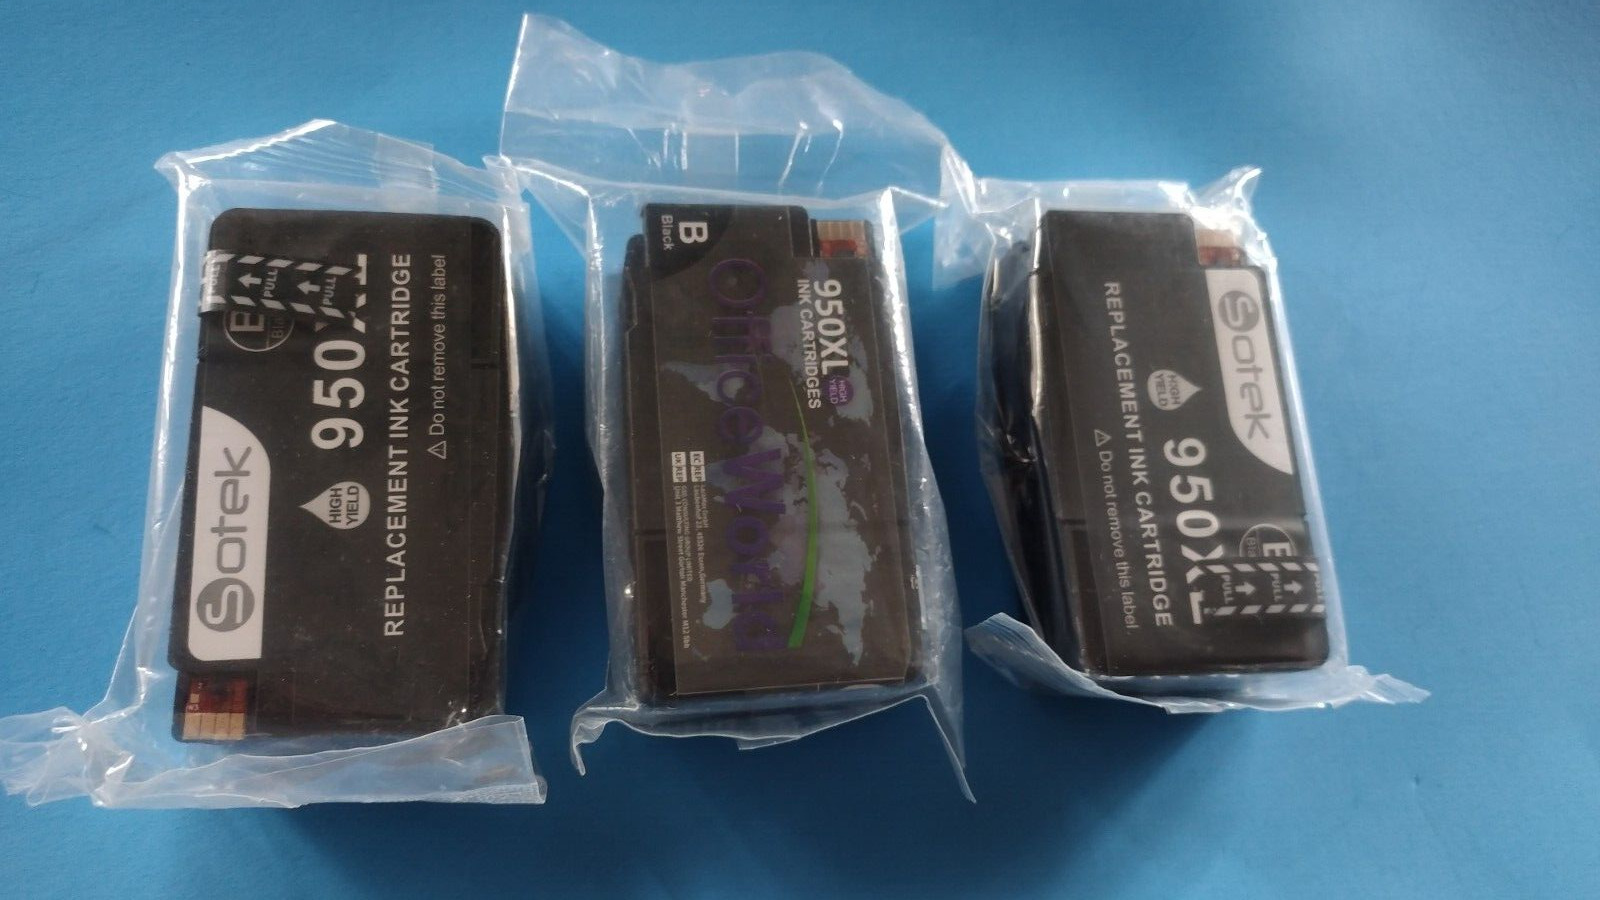 Lot of 3 New 950XL Black Replacement INK Cartridges for HP Printer